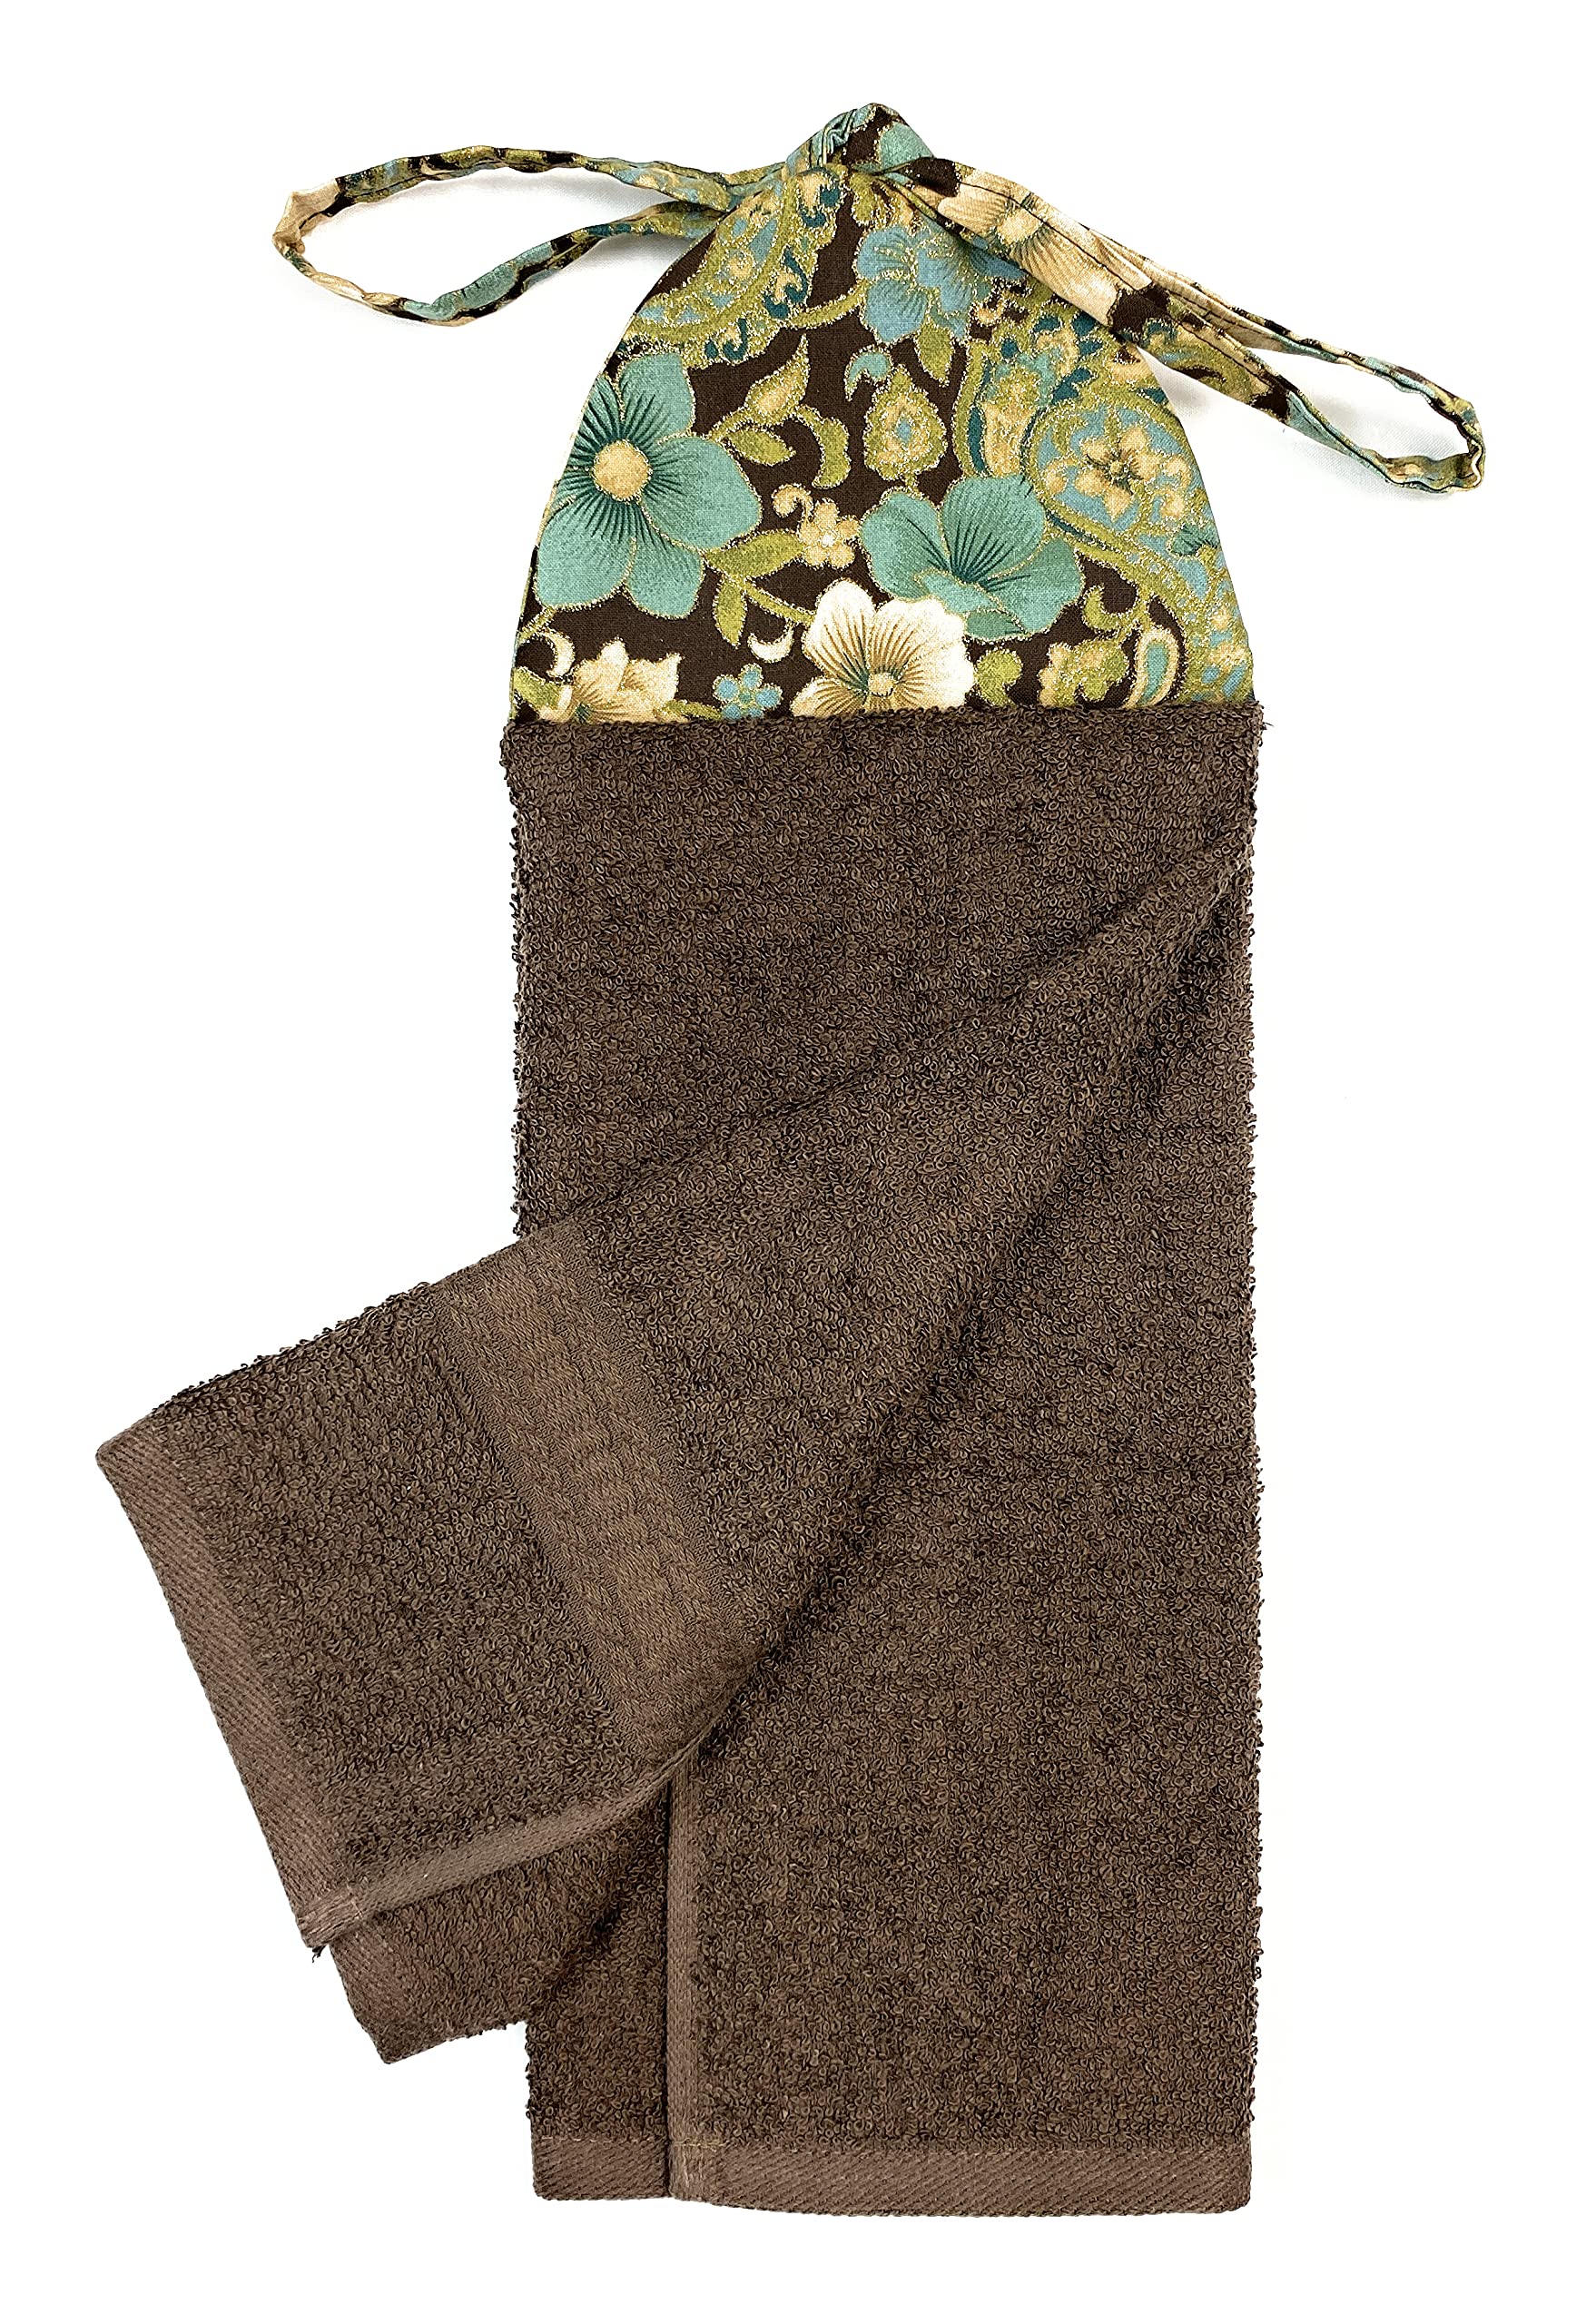 Teal and Cream Flowers and Paisley with Gold on Brown Reversible Ties On Stays Put Kitchen Hanging Loop Hand Dish Towel